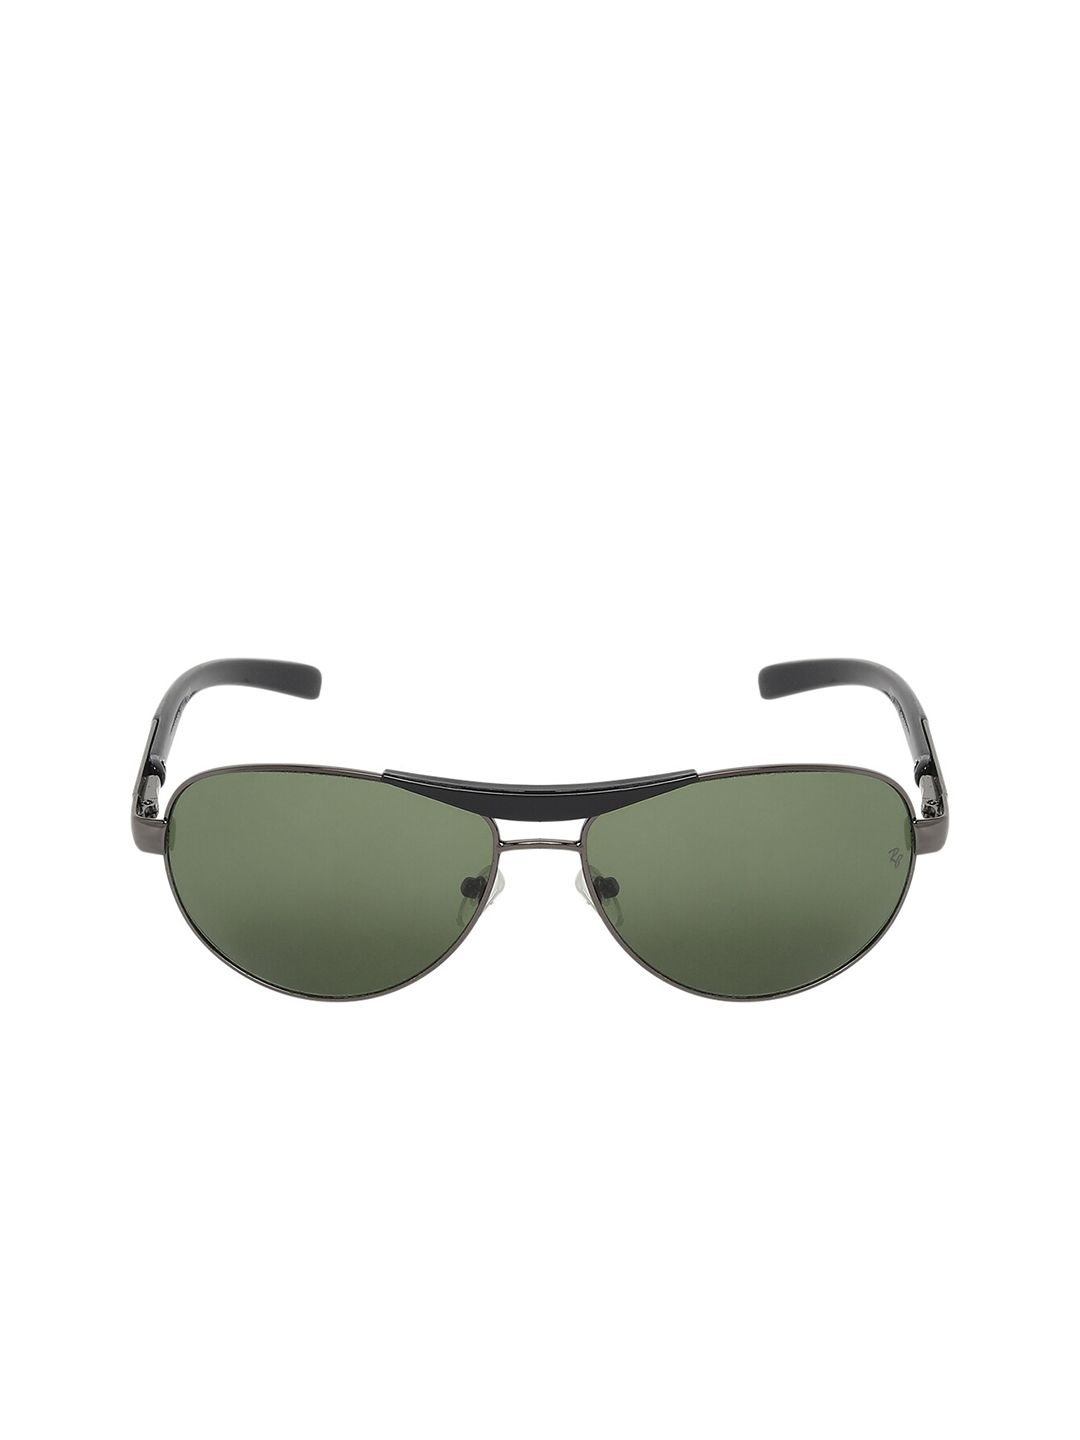 CRIBA Unisex Green Lens & Black Aviator Sunglasses with UV Protected Lens Price in India